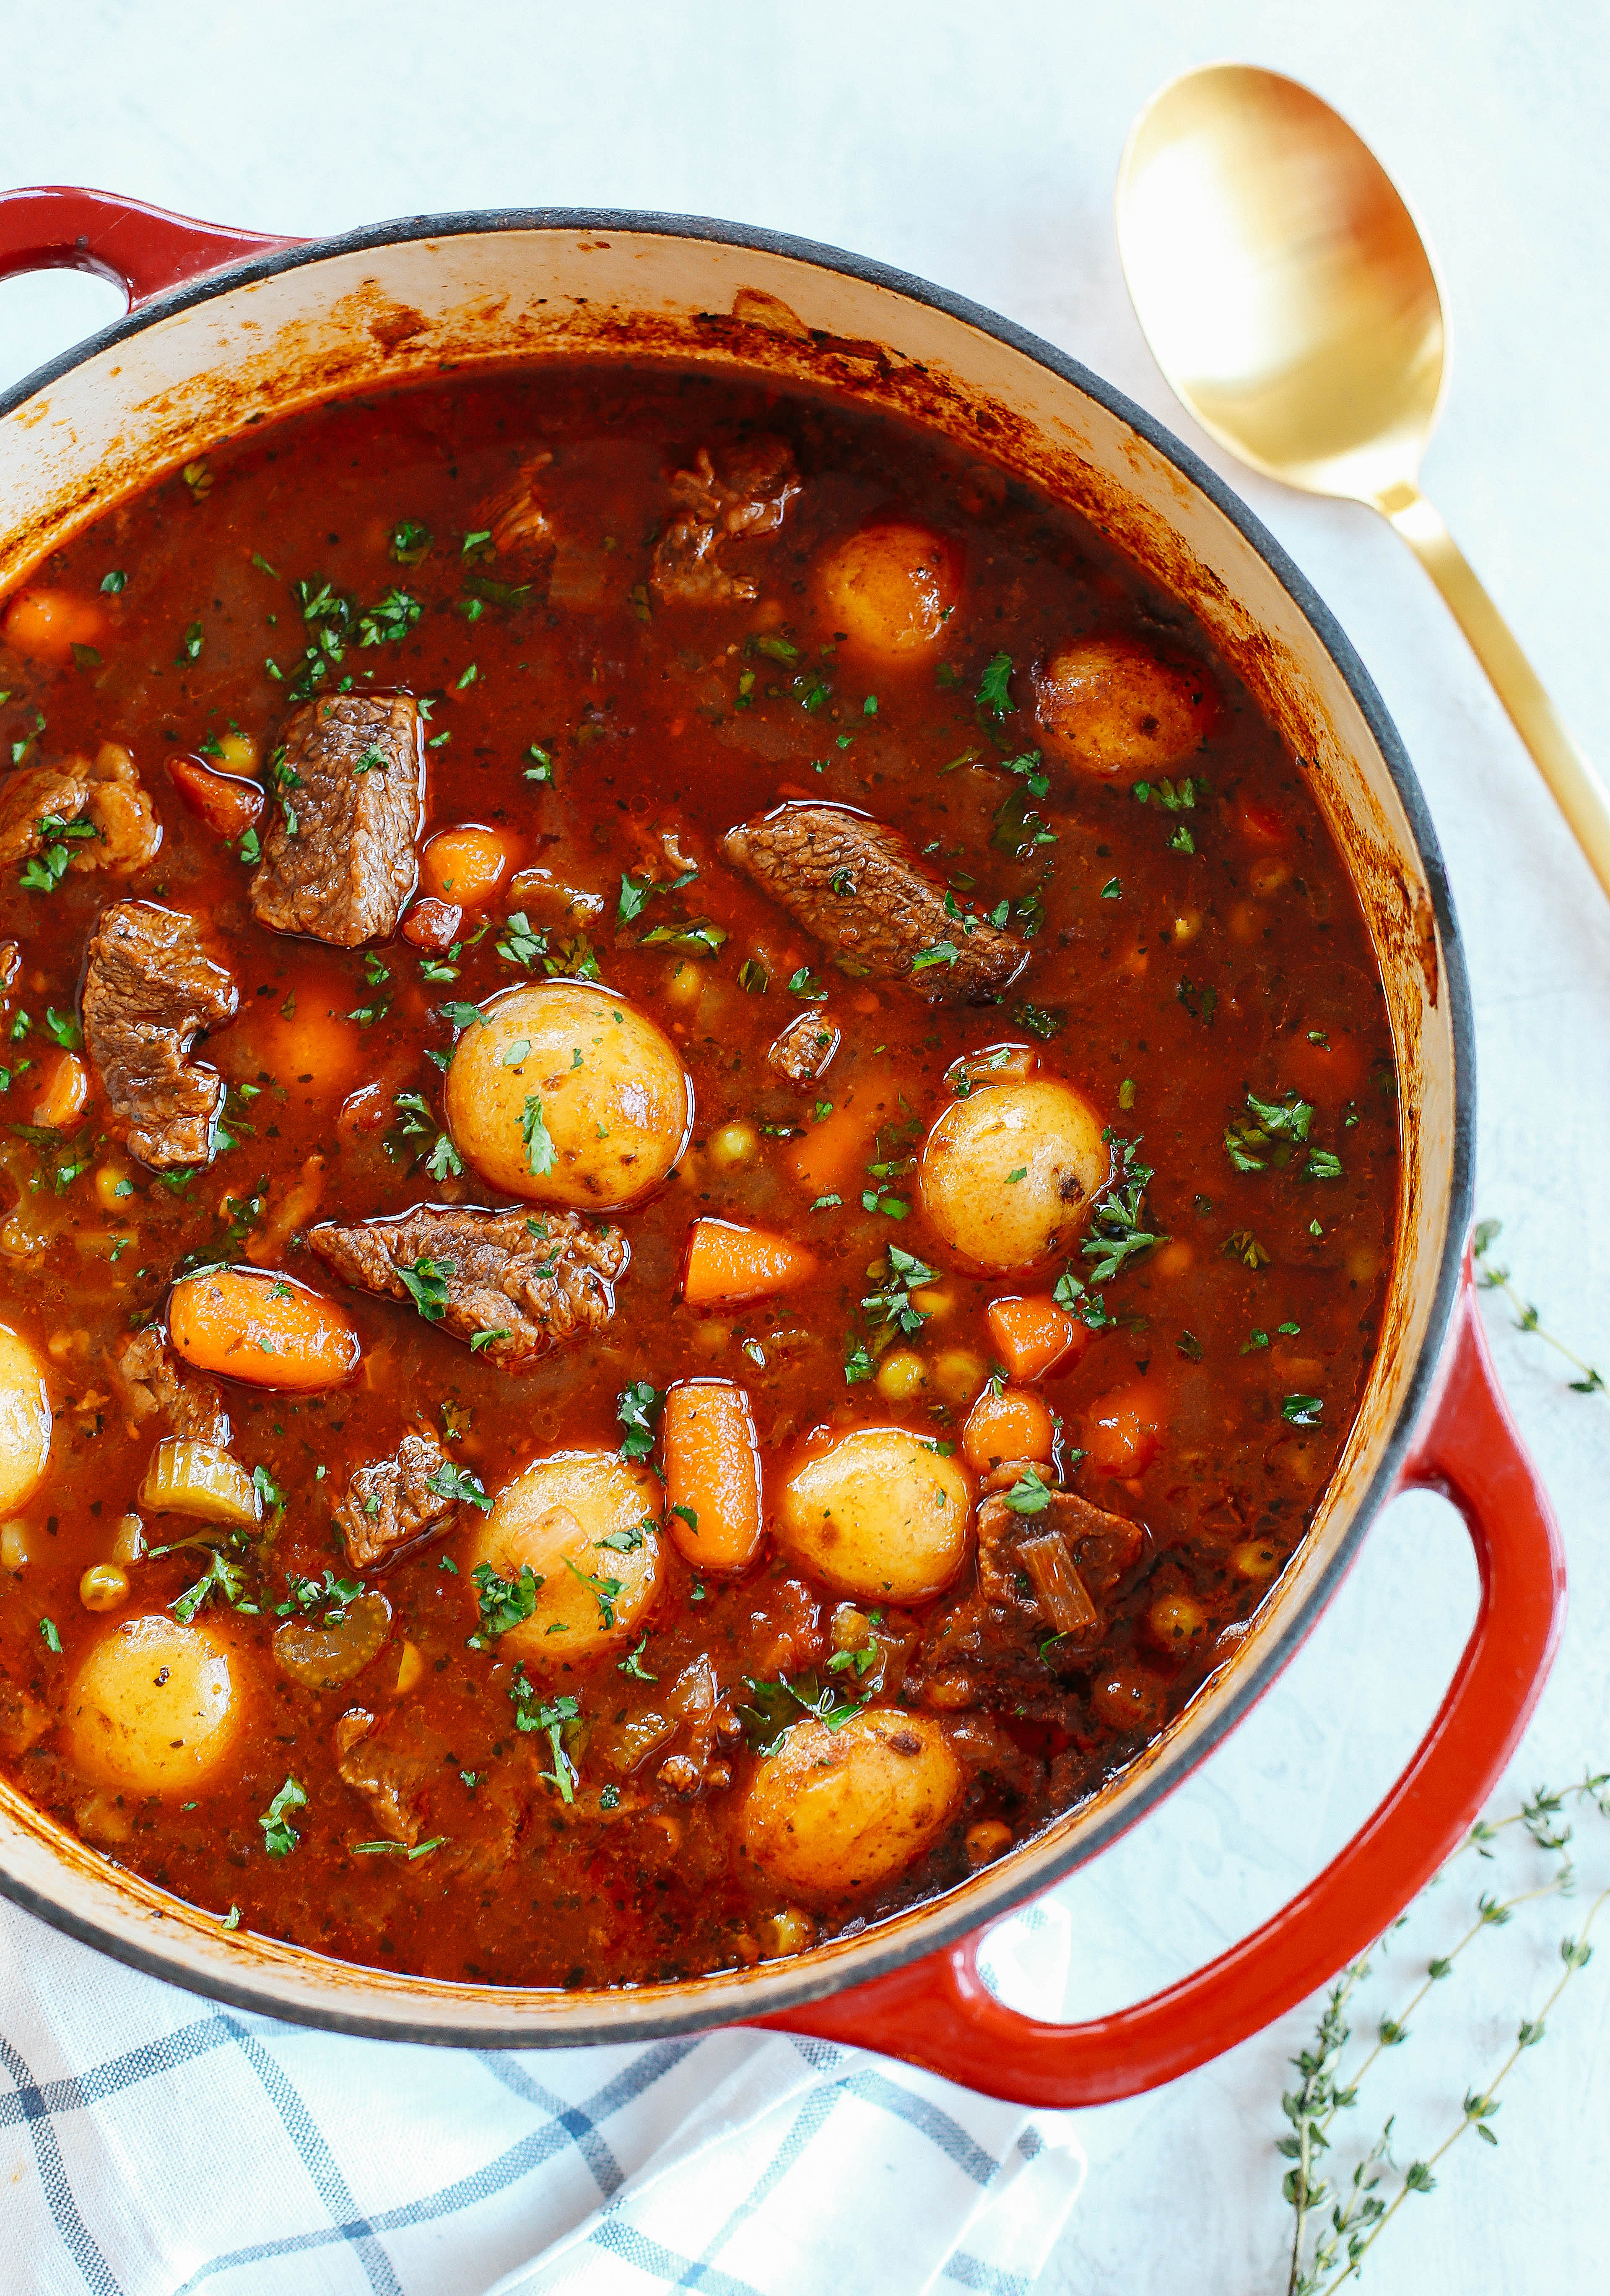 A bowl of beef stew with carrots and potatoes